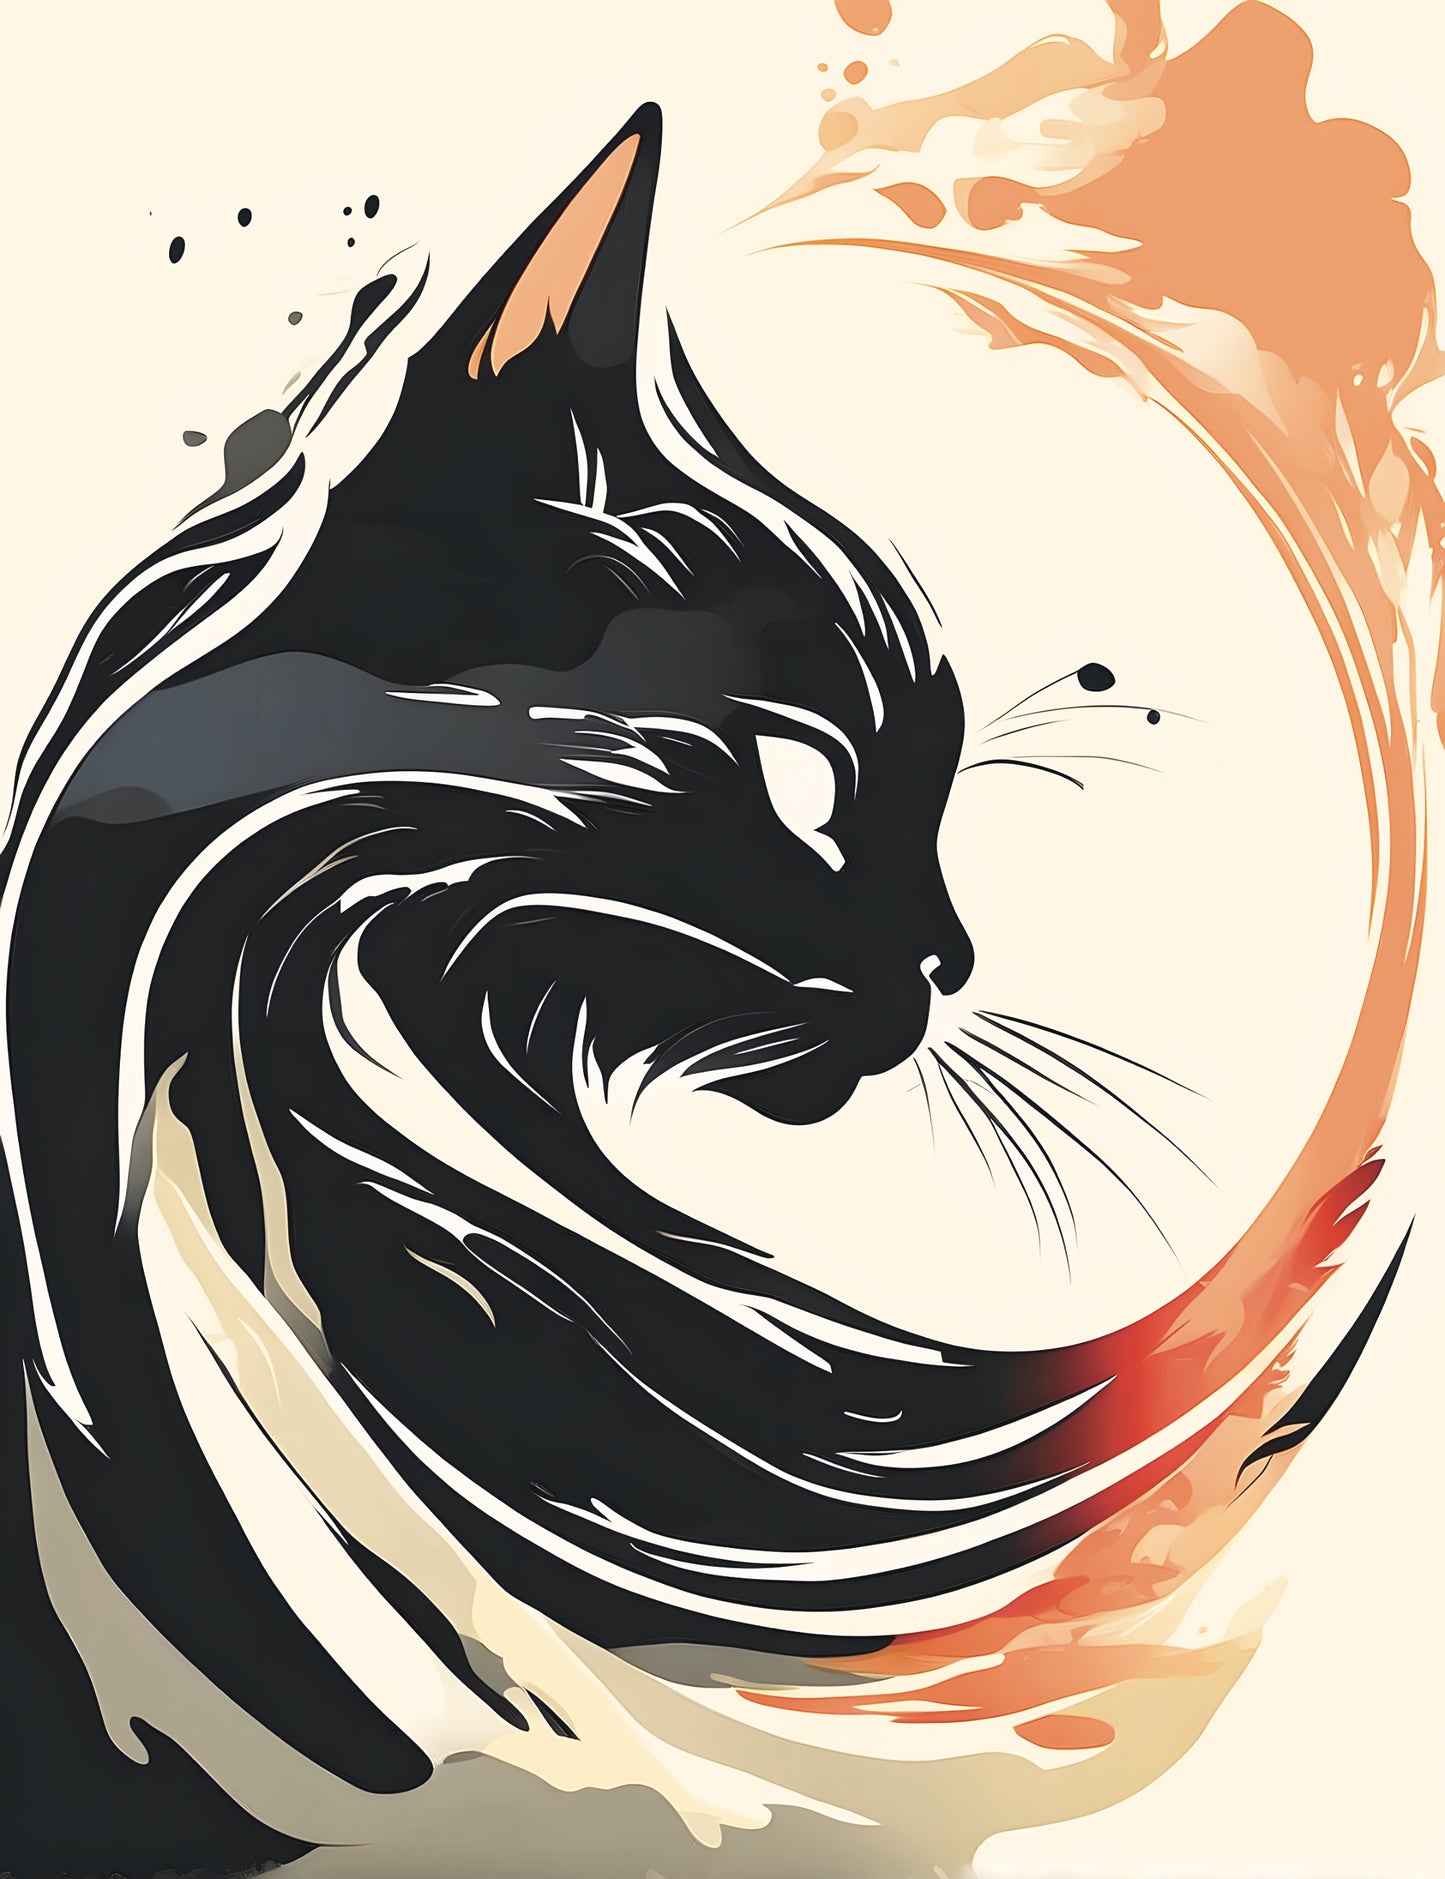 Canvas print "Purrfection Paw", cat in vector logo style